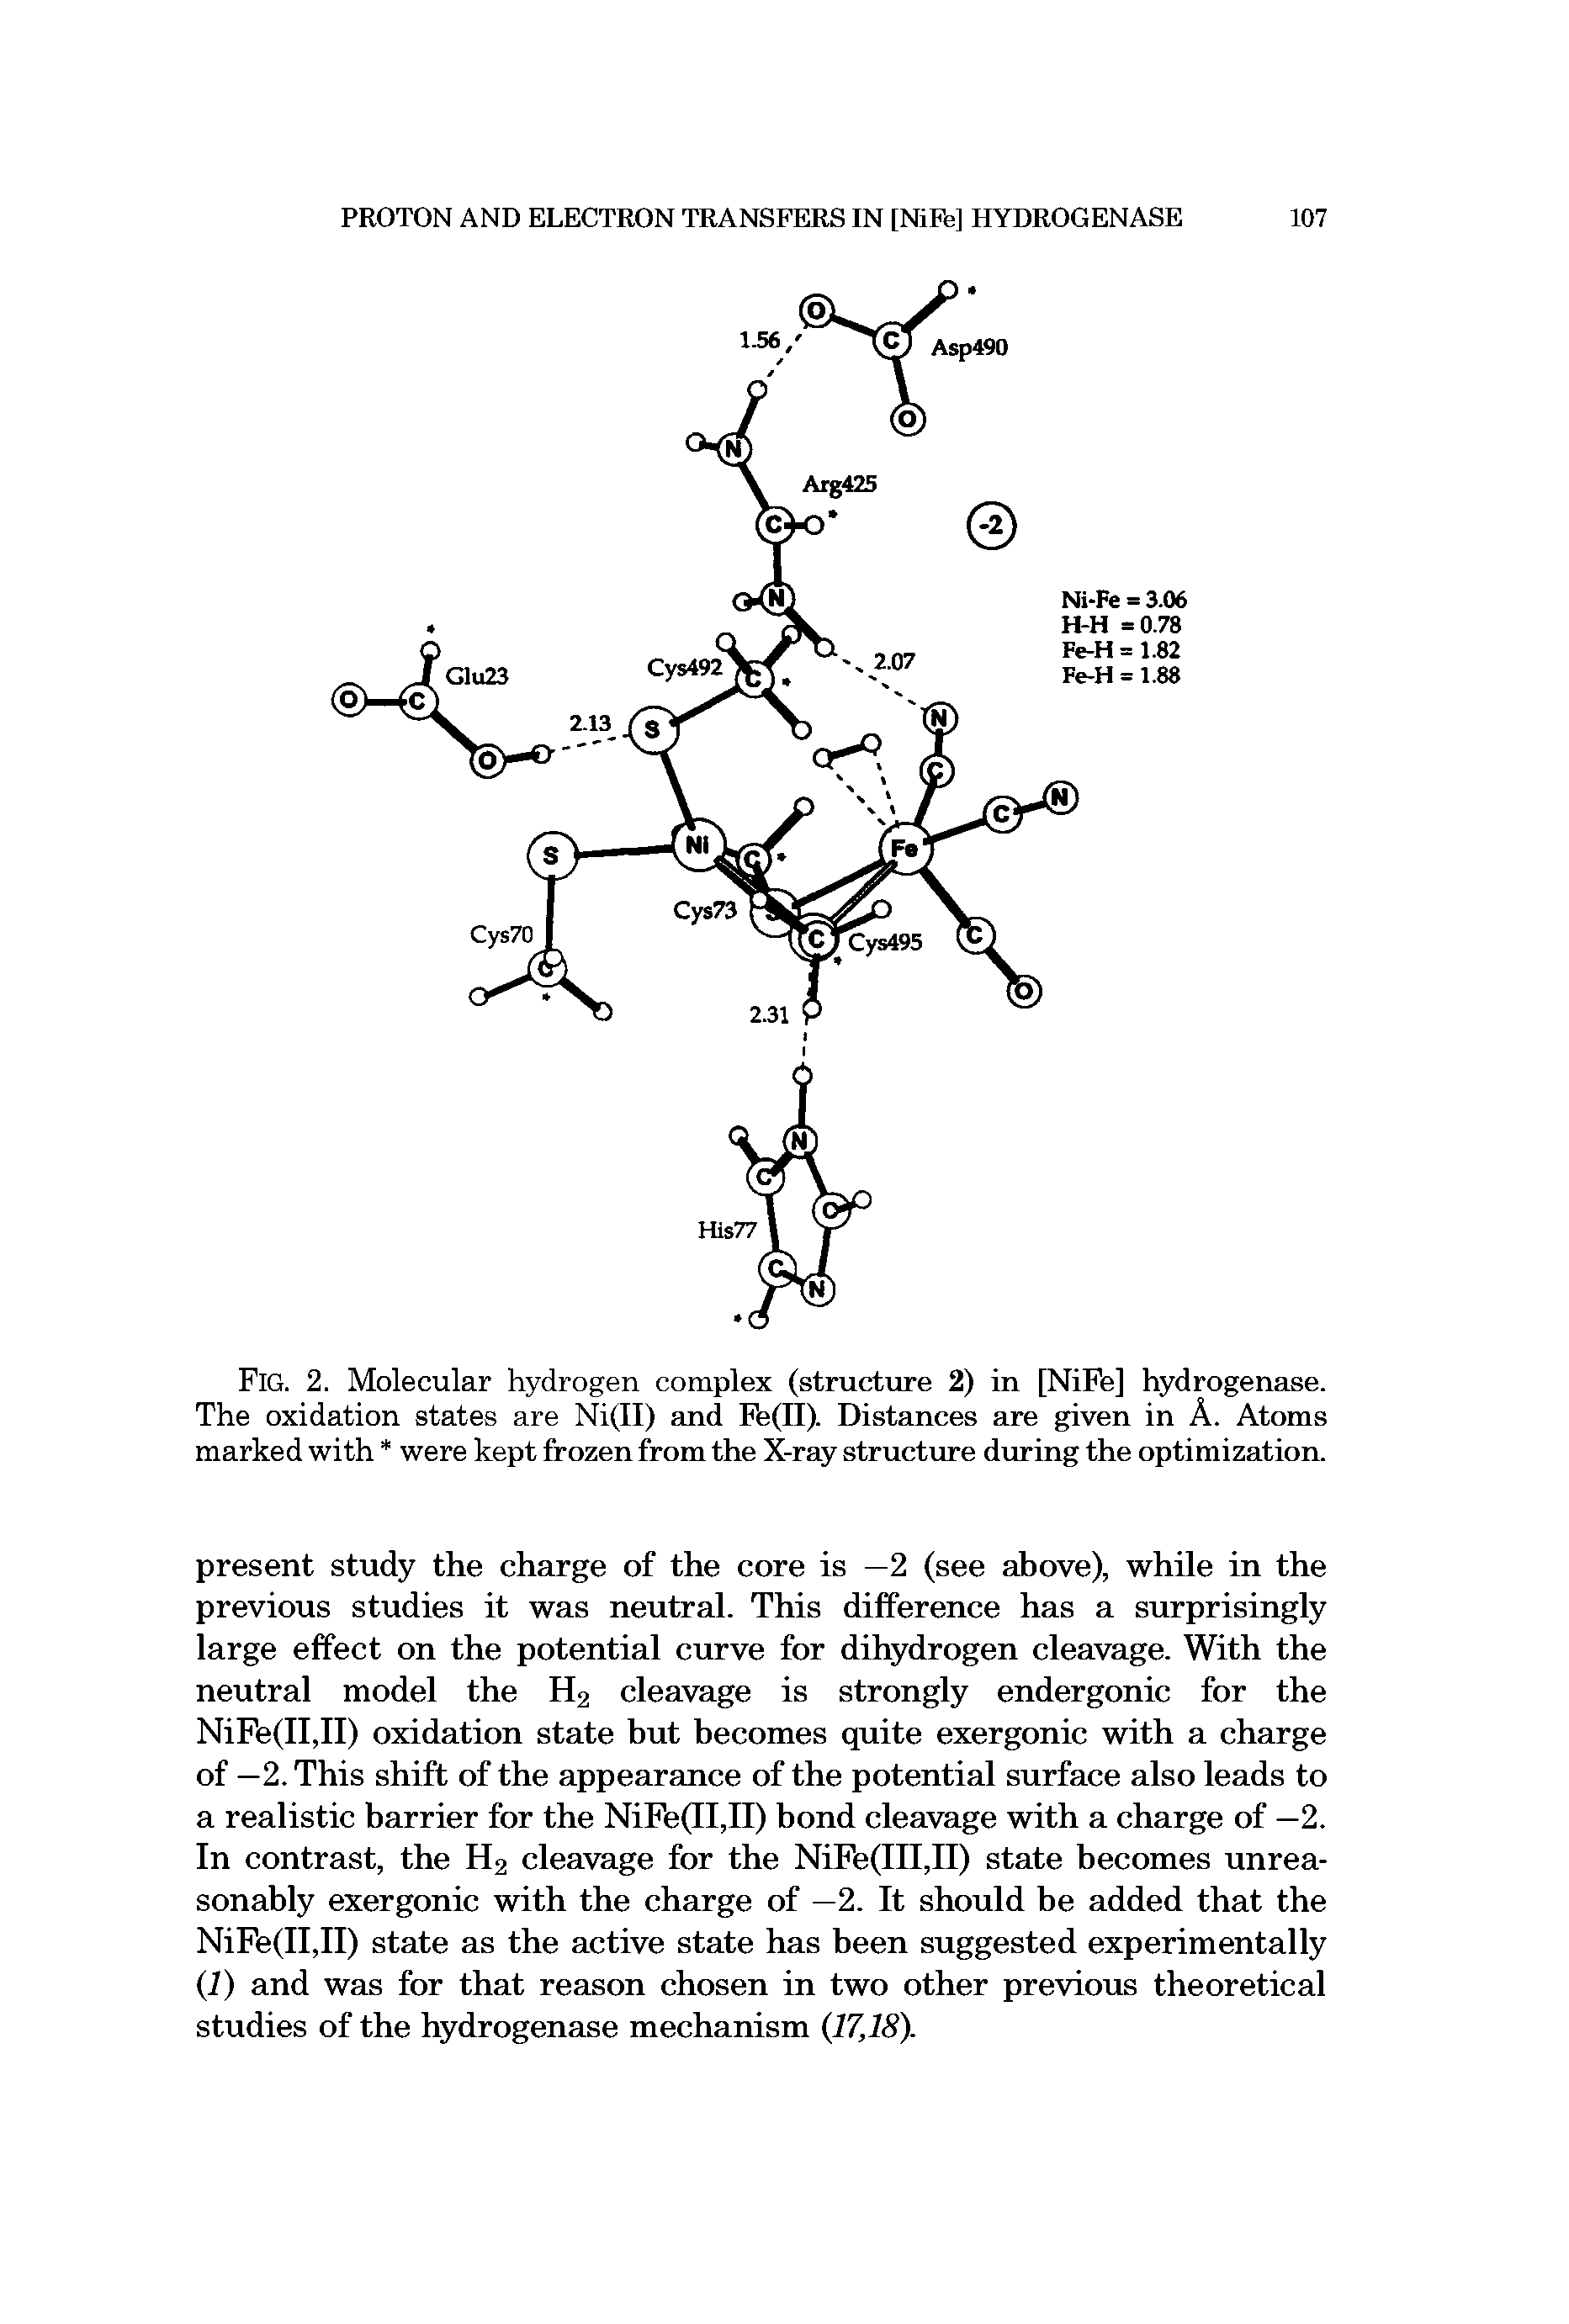 Fig. 2. Molecular hydrogen complex (structure 2) in [NiFe] hydrogenase. The oxidation states are Ni(II) and Fe(II). Distances are given in A. Atoms marked with were kept frozen from the X-ray structure during the optimization.